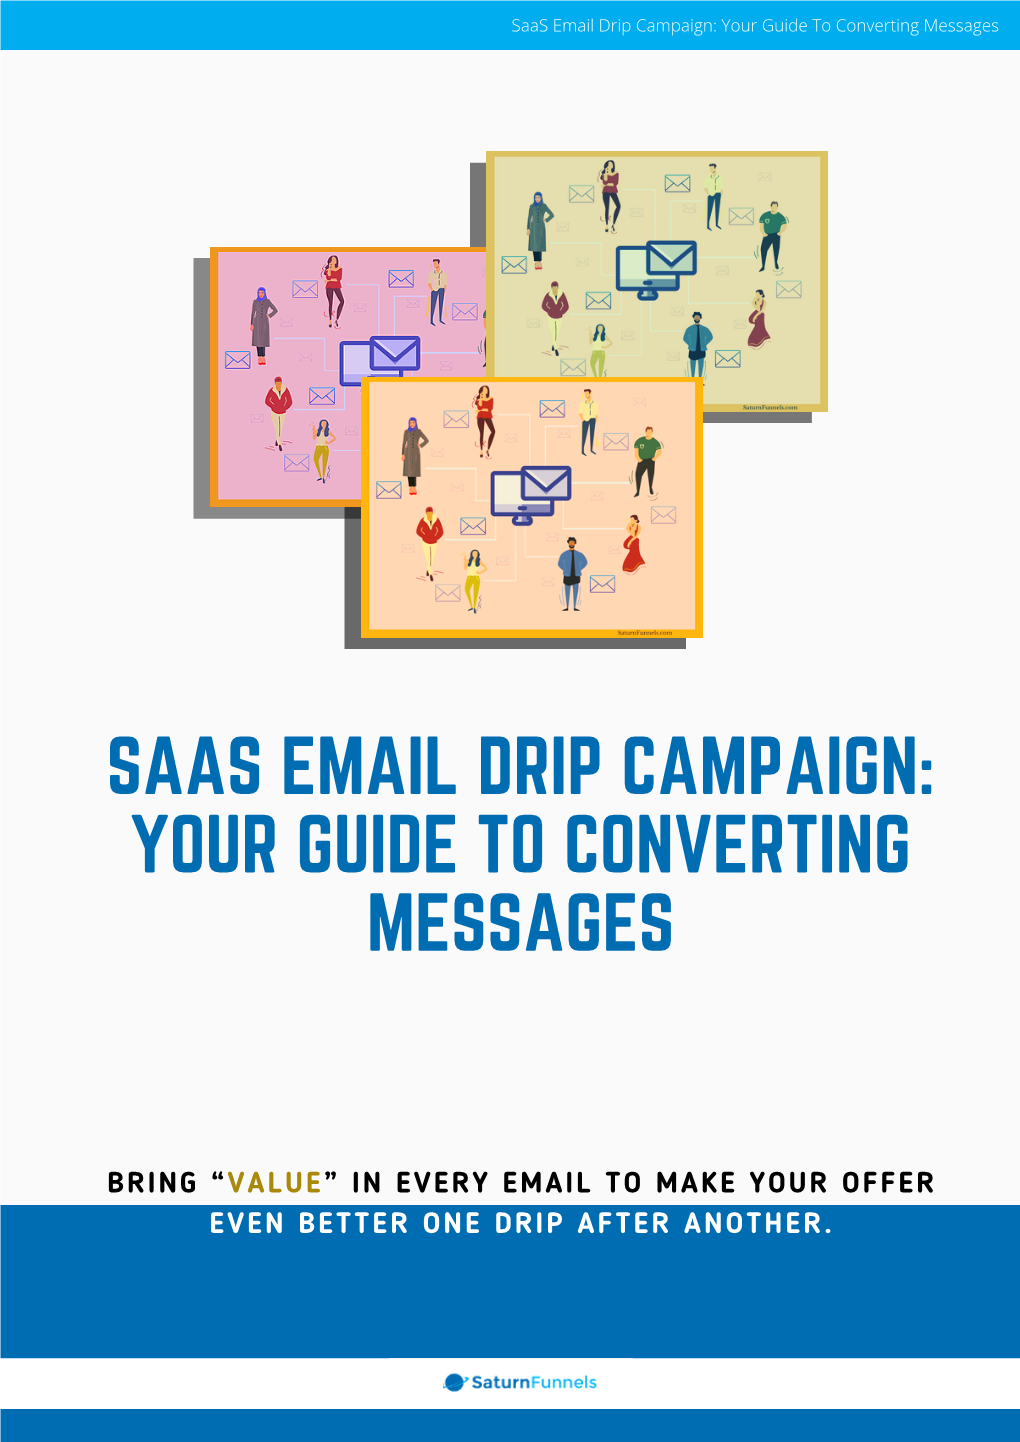 Saas Email Drip Campaign: Your Guide to Converting Messages